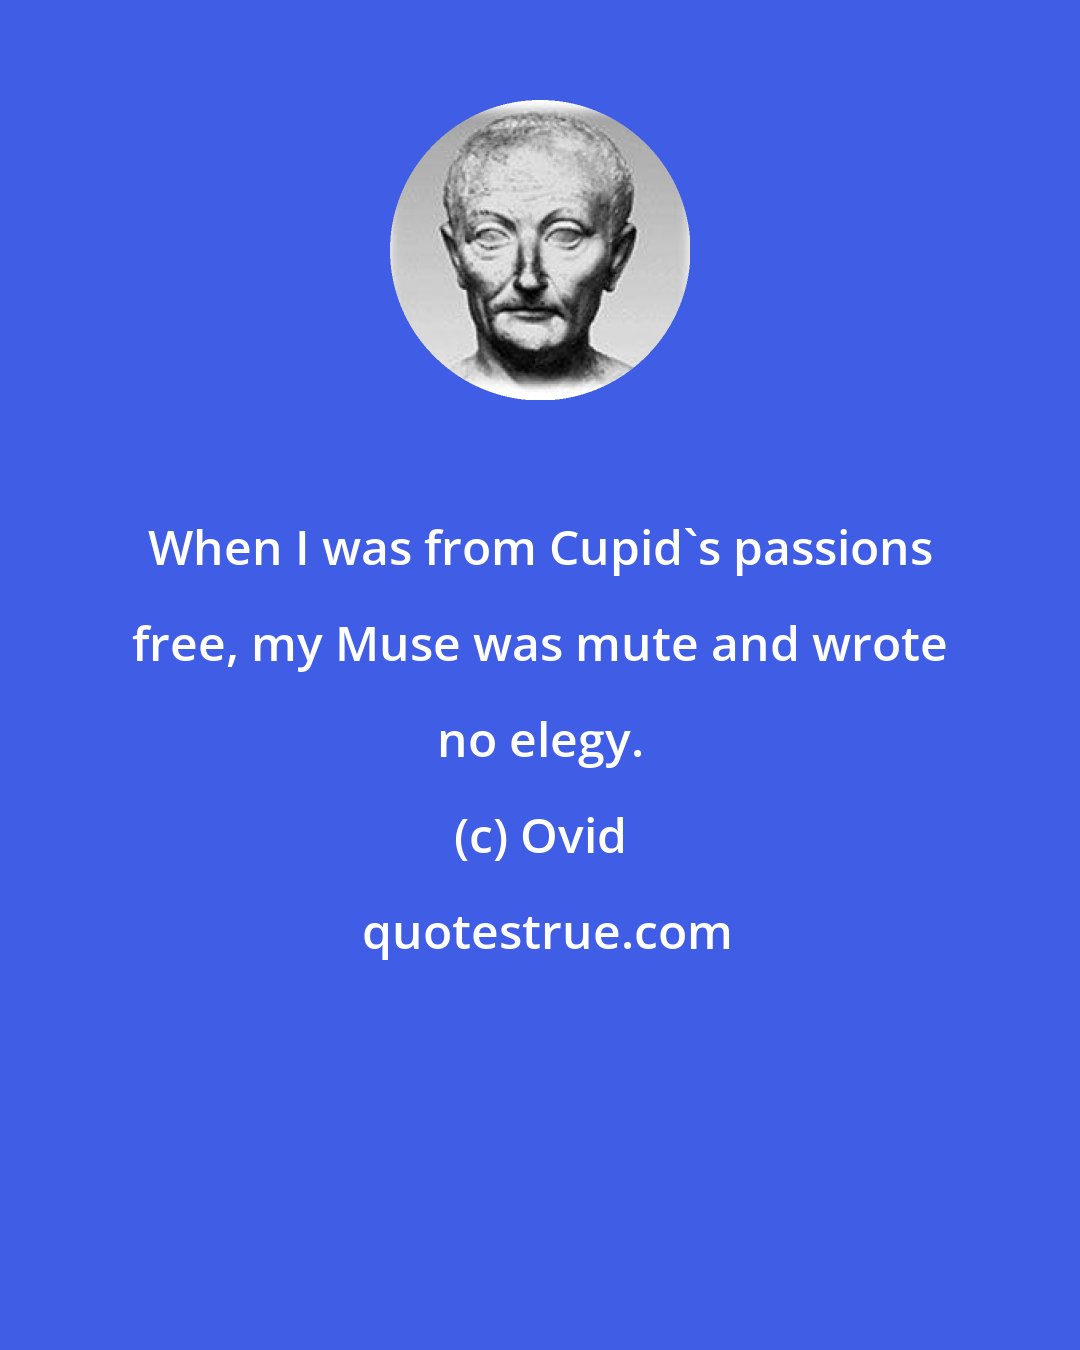 Ovid: When I was from Cupid's passions free, my Muse was mute and wrote no elegy.